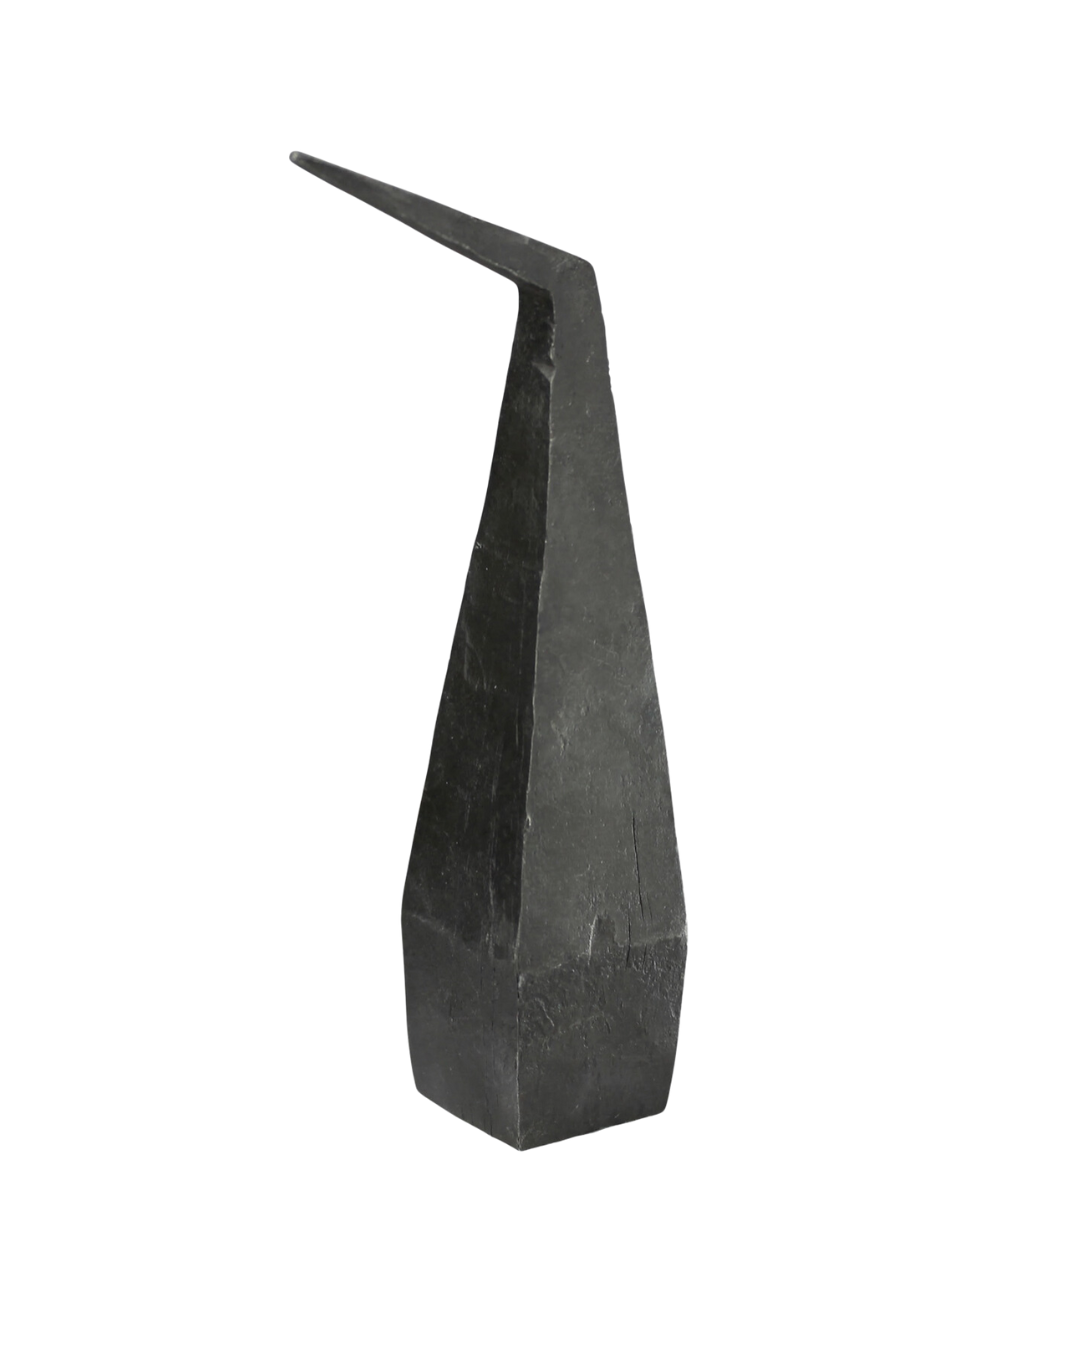 A modern, abstract black sculpture with a sharp, angled peak, resembling a minimalist bird or an artistic representation of a mountain, isolated on a white background in Scottsdale, Arizona by HomArt's Forged Iron Bird Large.